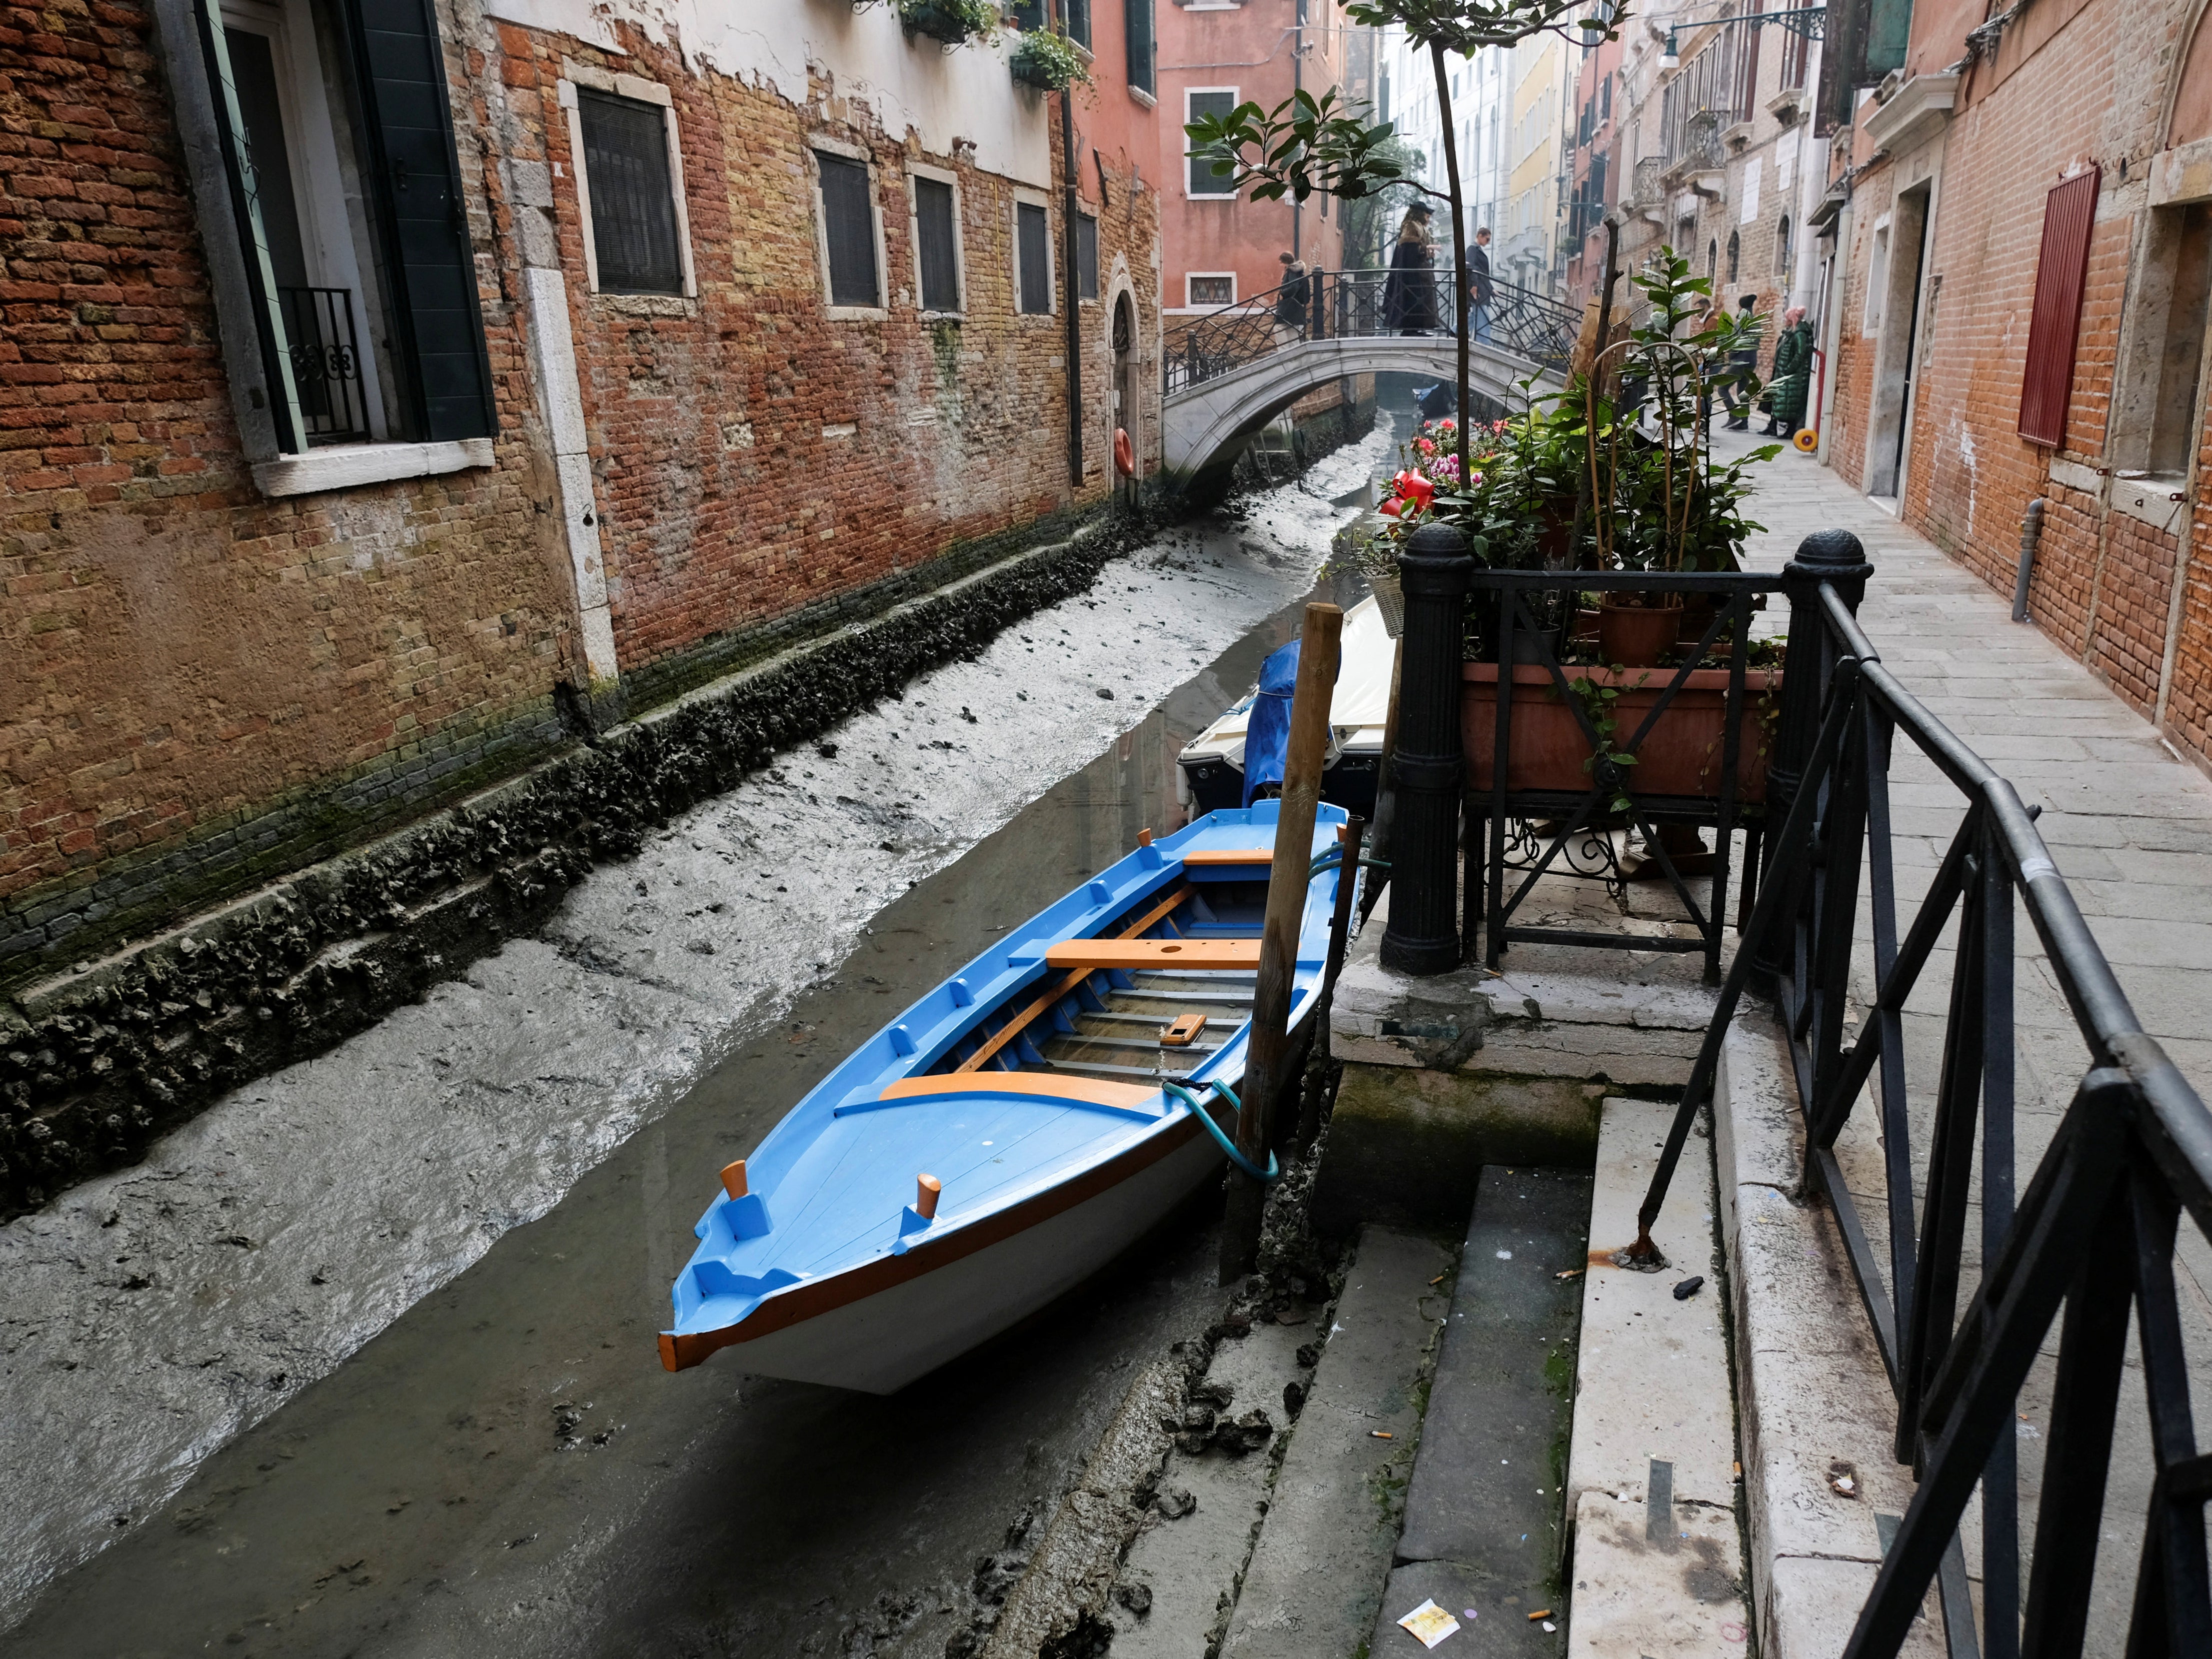 Venice canals reduced to muddy ditches by severe low tides | The Independent